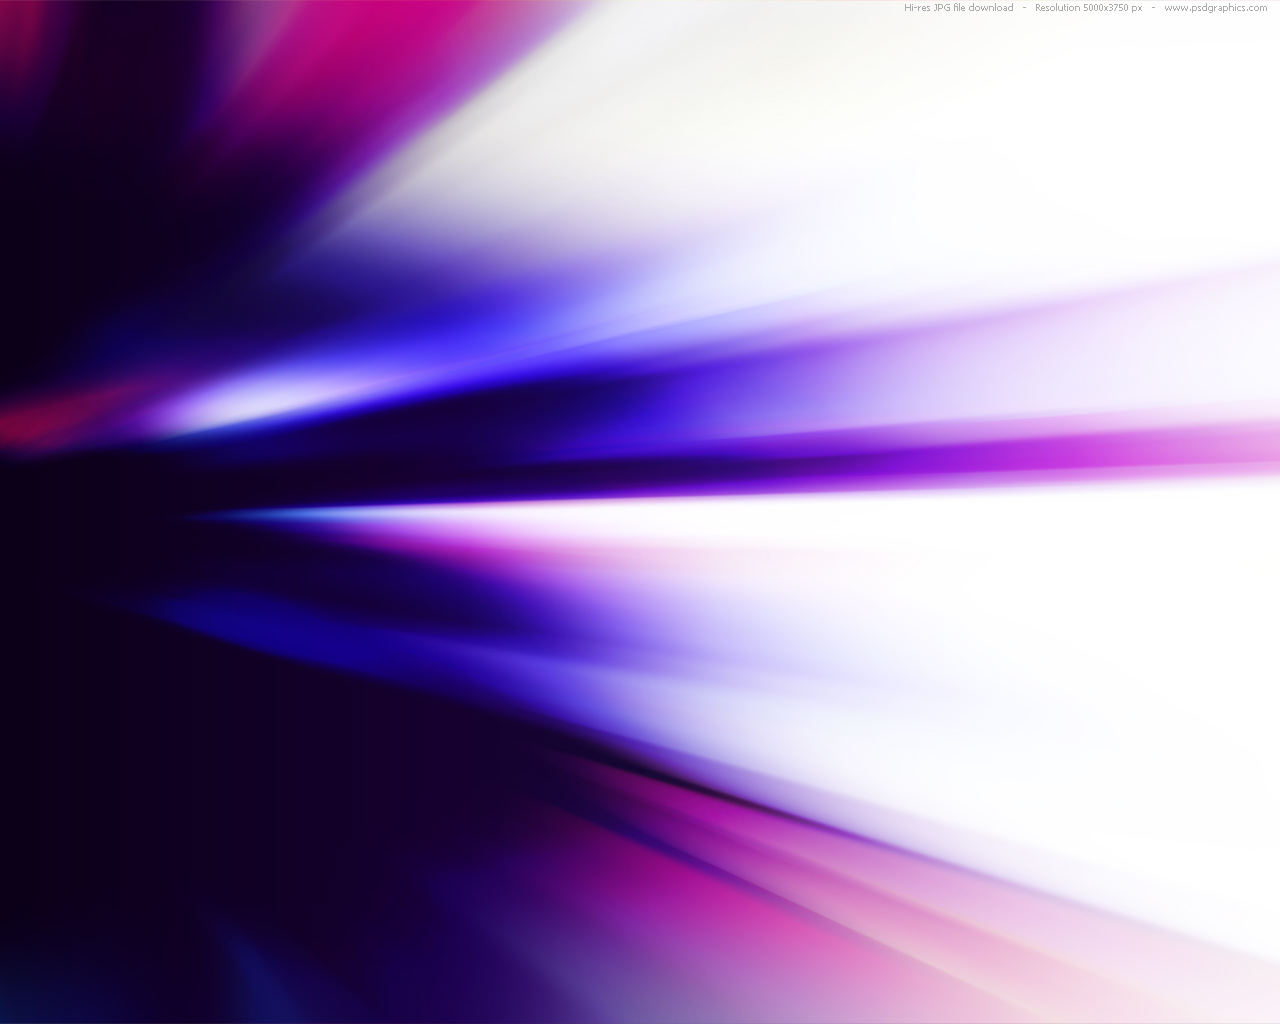 Abstract motion blur background PSDGraphics 1280x1024